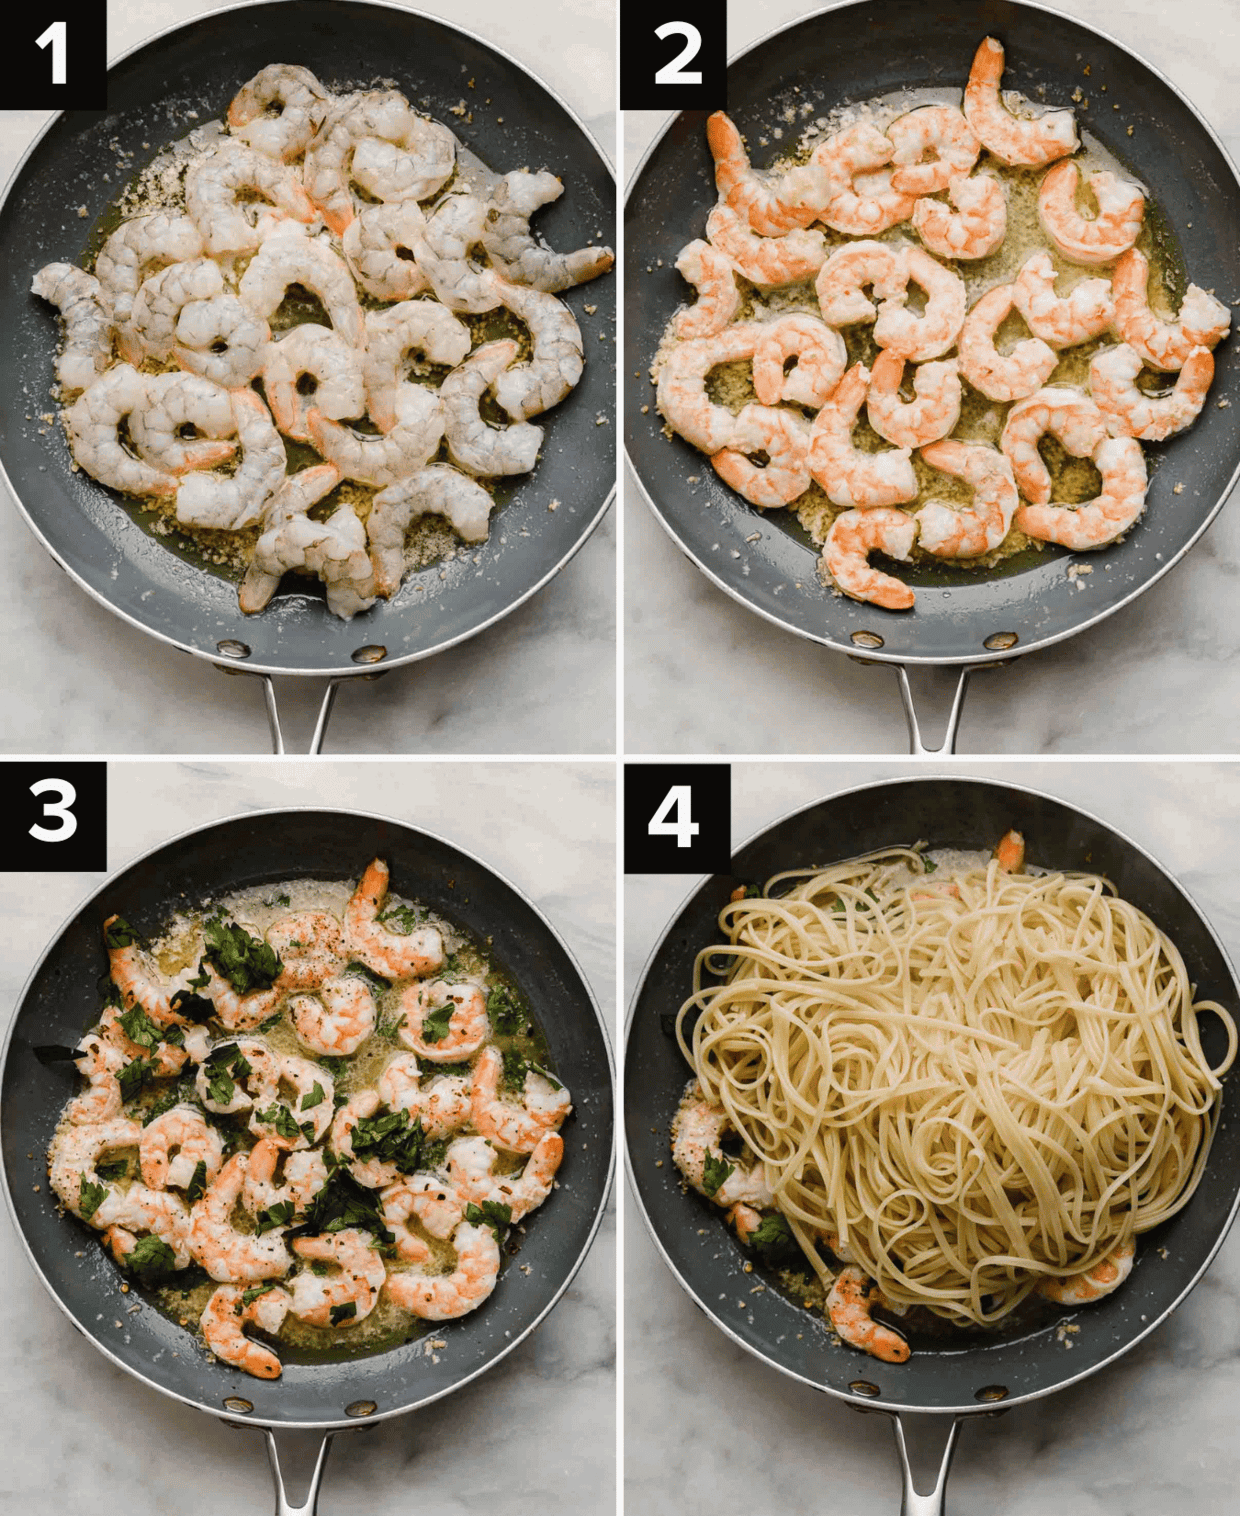 Four photos showing how to make Shrimp Scampi with Linguine, top left is skillet with raw shrimp in it, top right image is pink cooked shrimp in a skillet, bottom left photo is cooked shrimp topped with fresh parsley, bottom right image is linguine noodles overtop shrimp that's in a skillet.